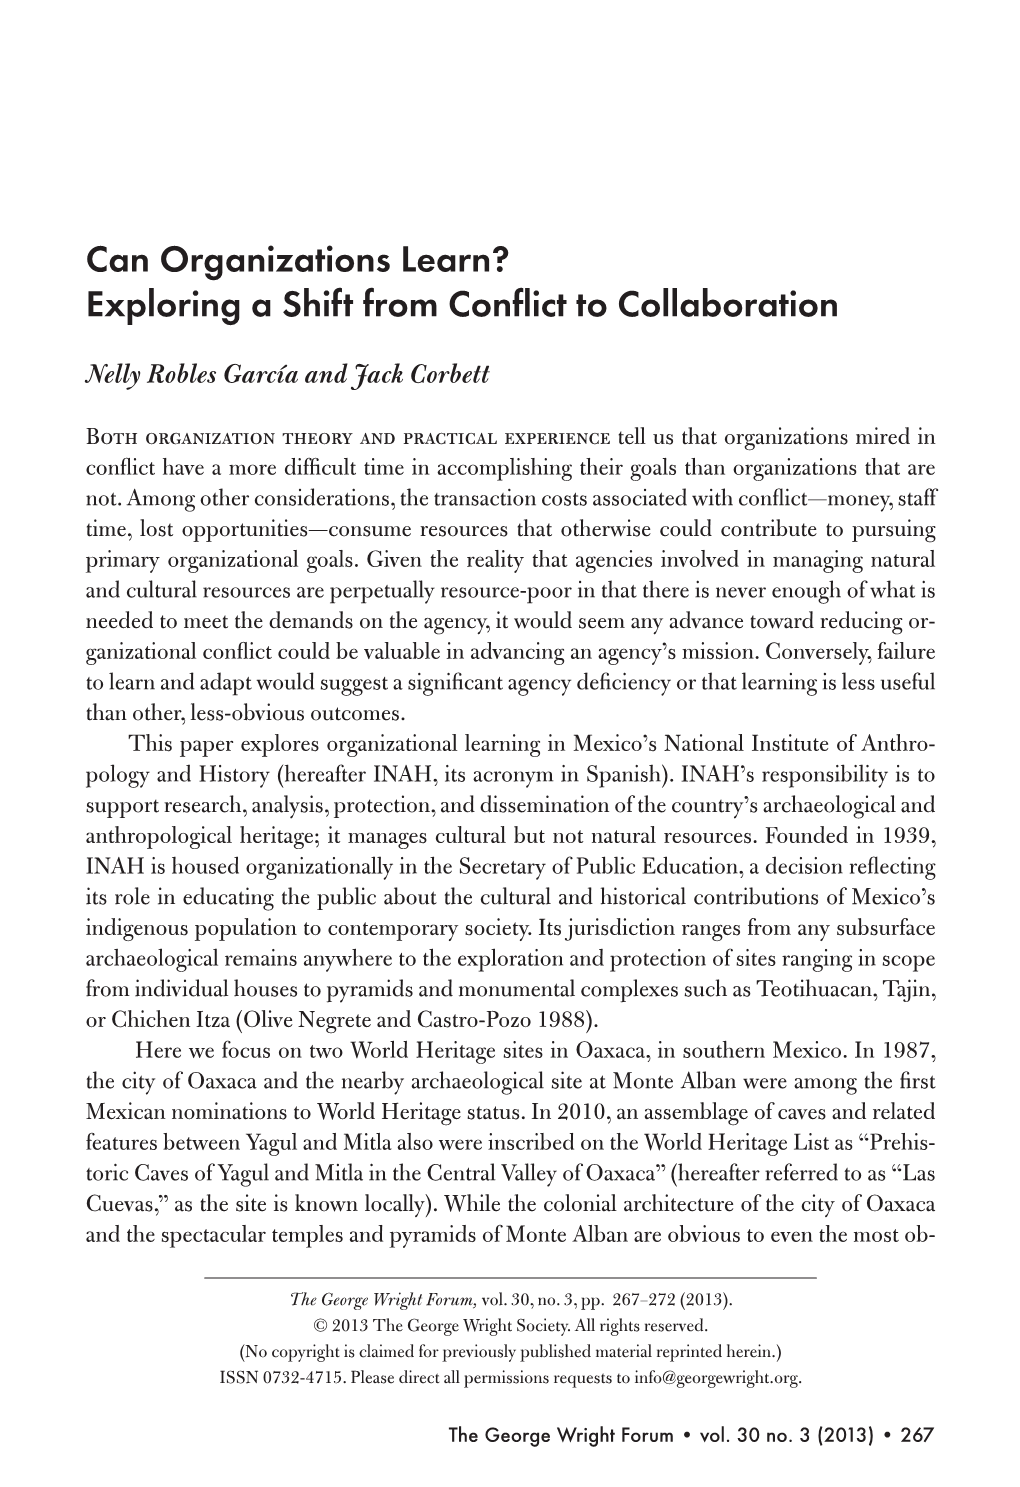 Can Organizations Learn? Exploring a Shift from Conflict to Collaboration